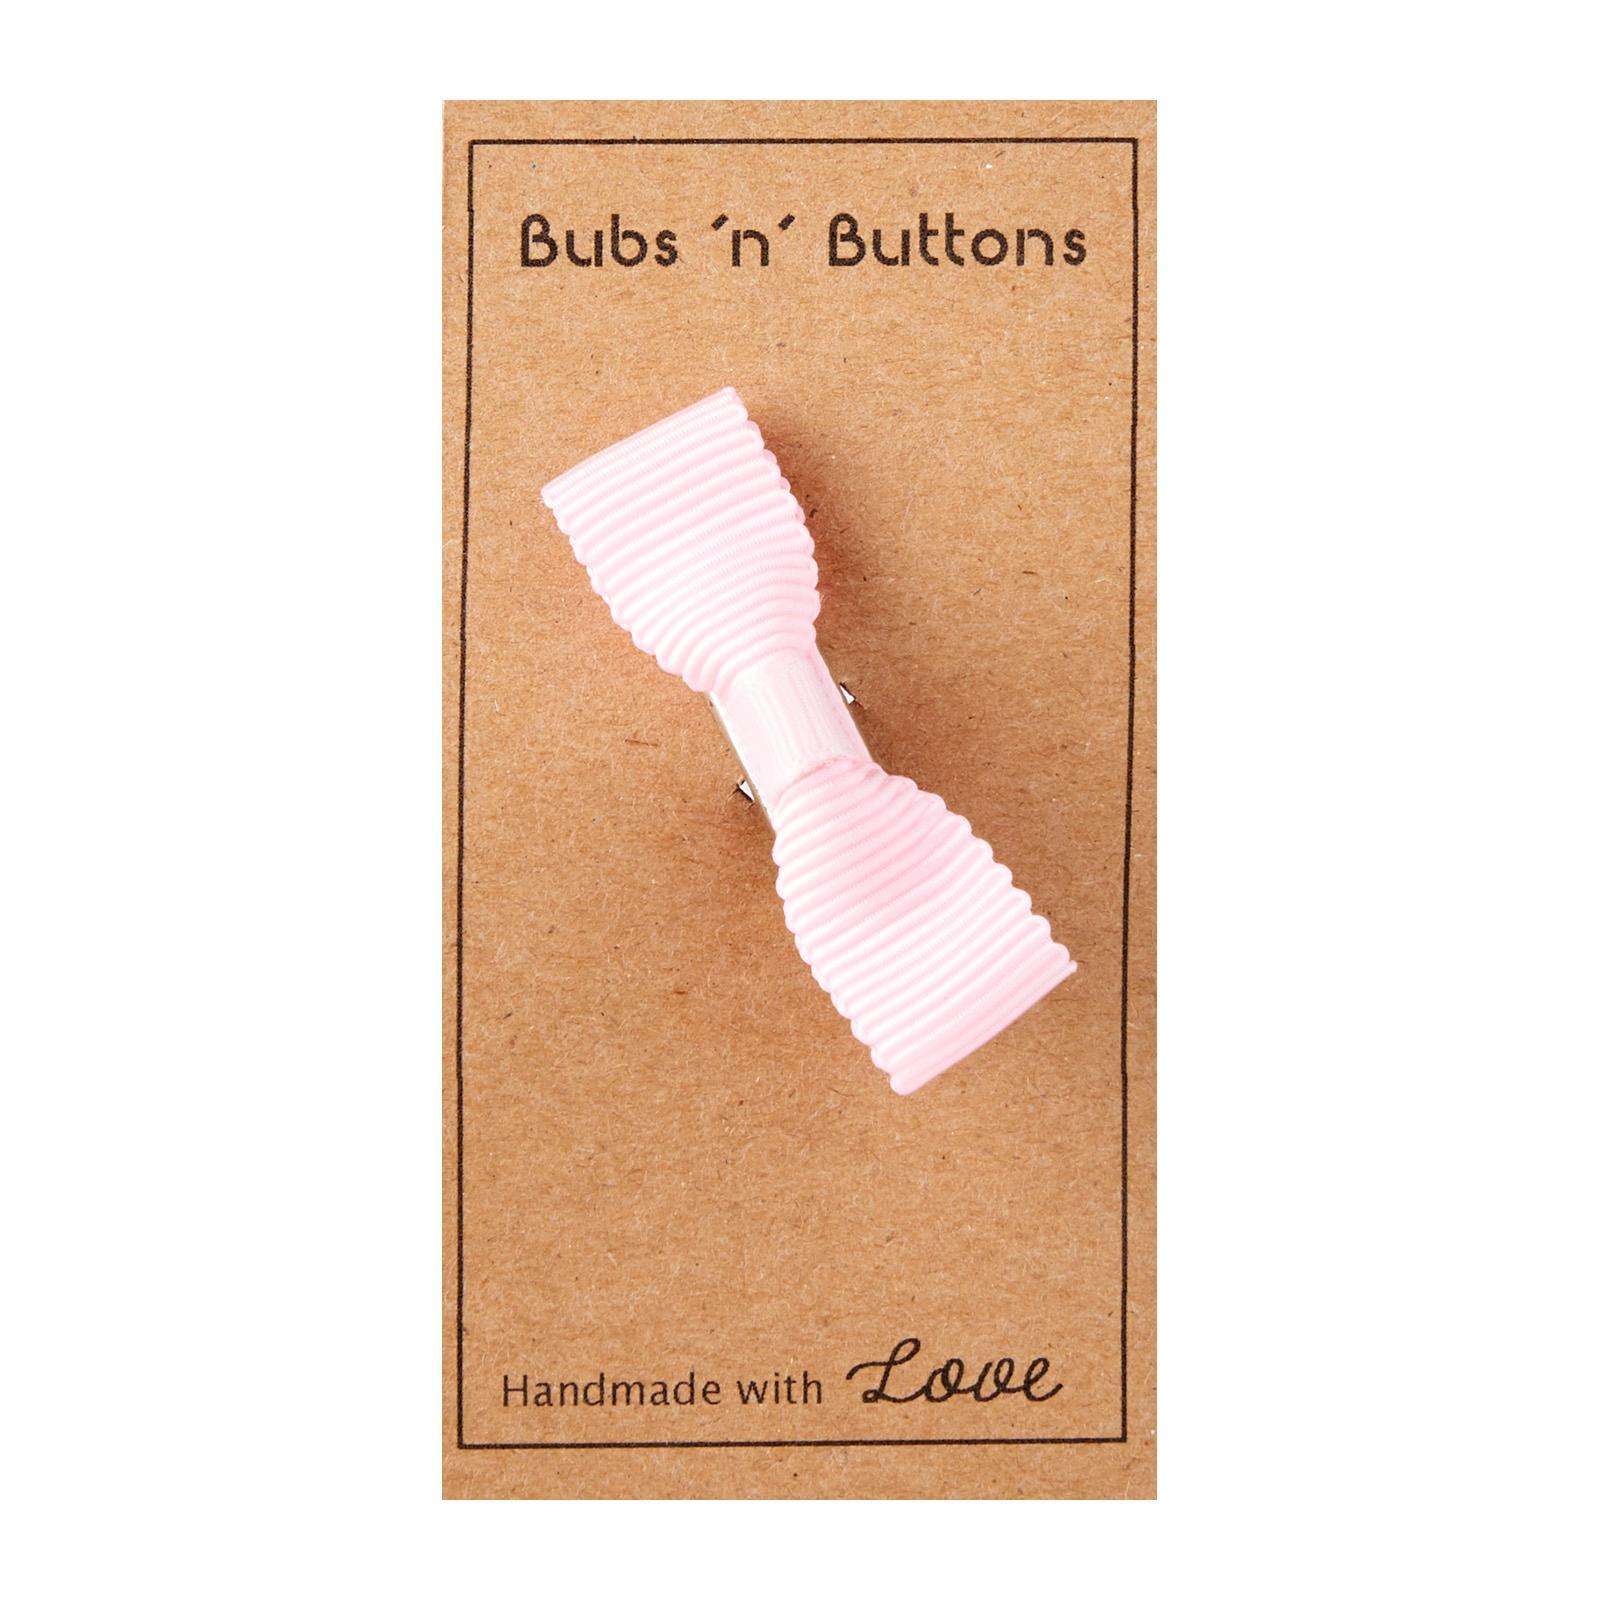 Bubs 'n' Buttons Simply Posh Clippers